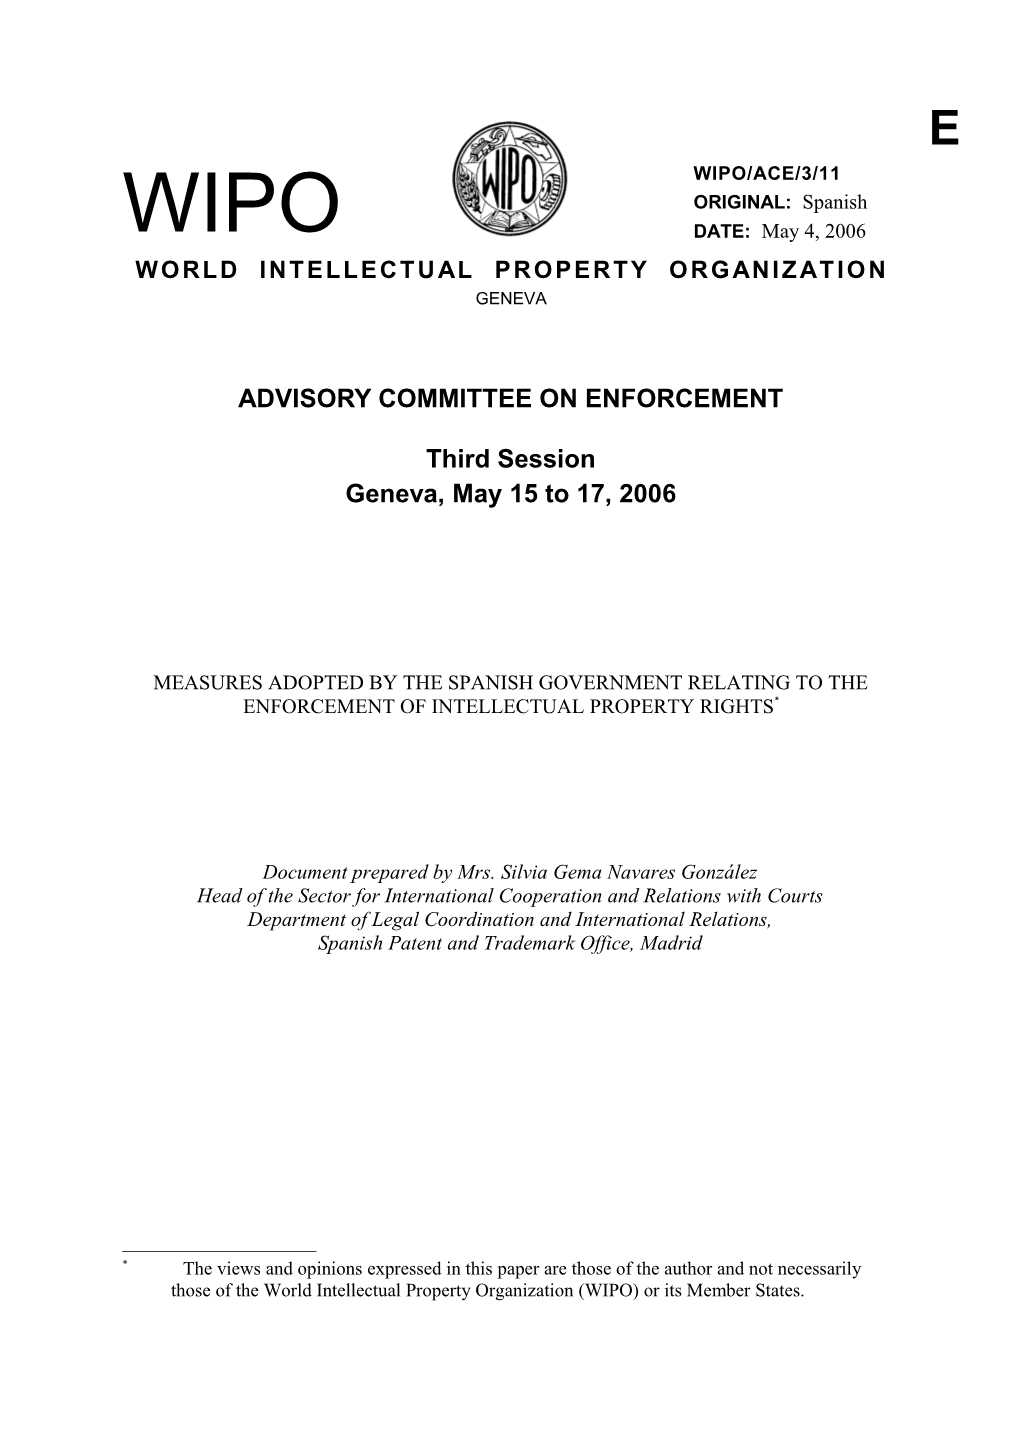 WIPO/ACE/3/11: Measures Adopted by the Spanish Government Relating to the Enforcement Of